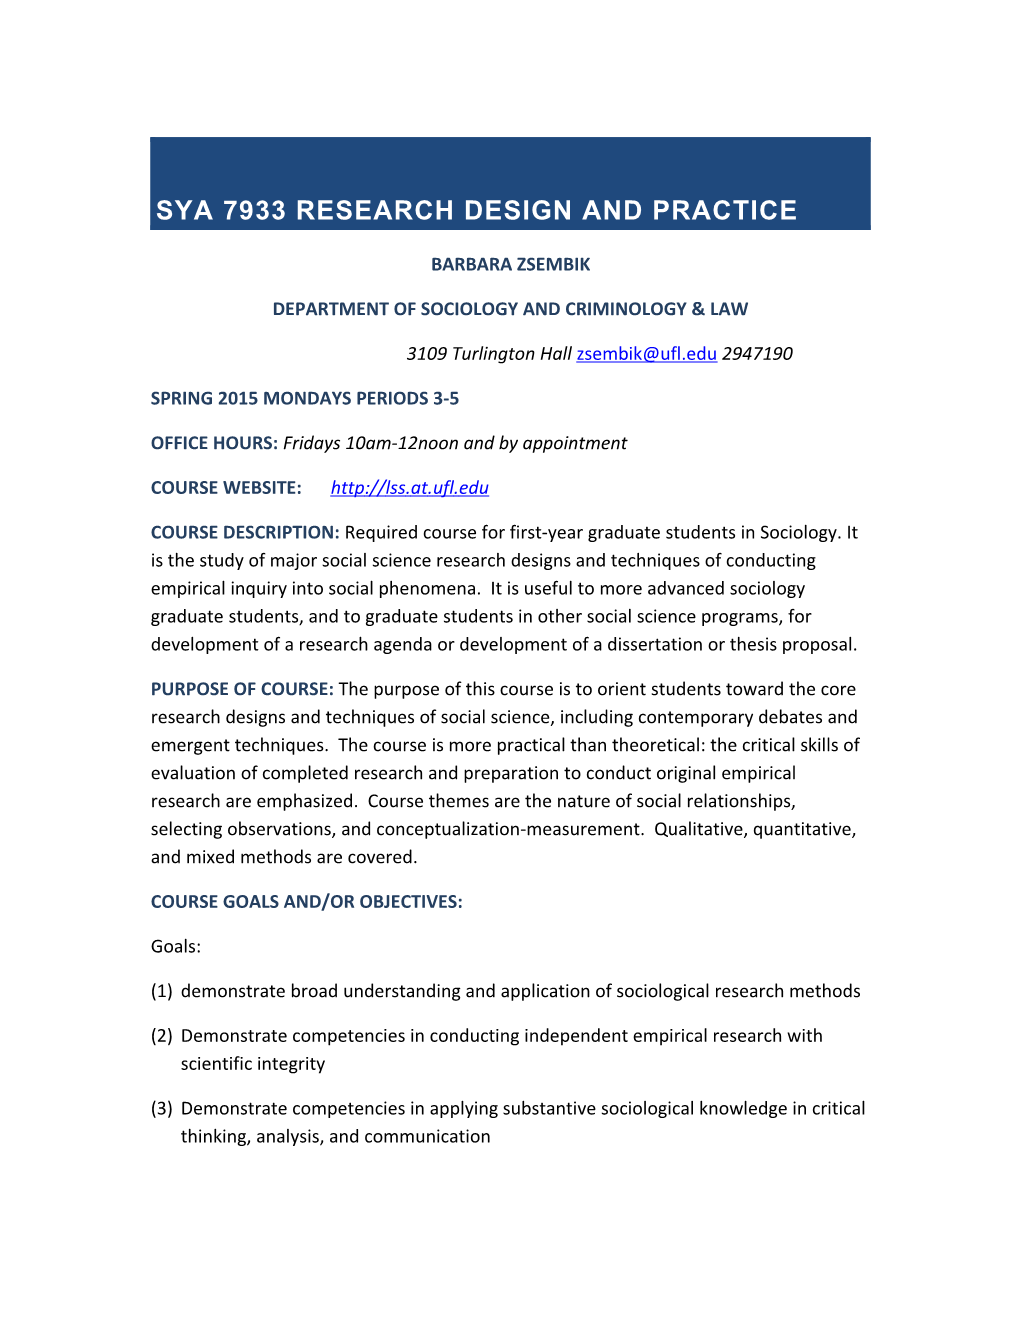 Sya 7933 Research Design and Practice